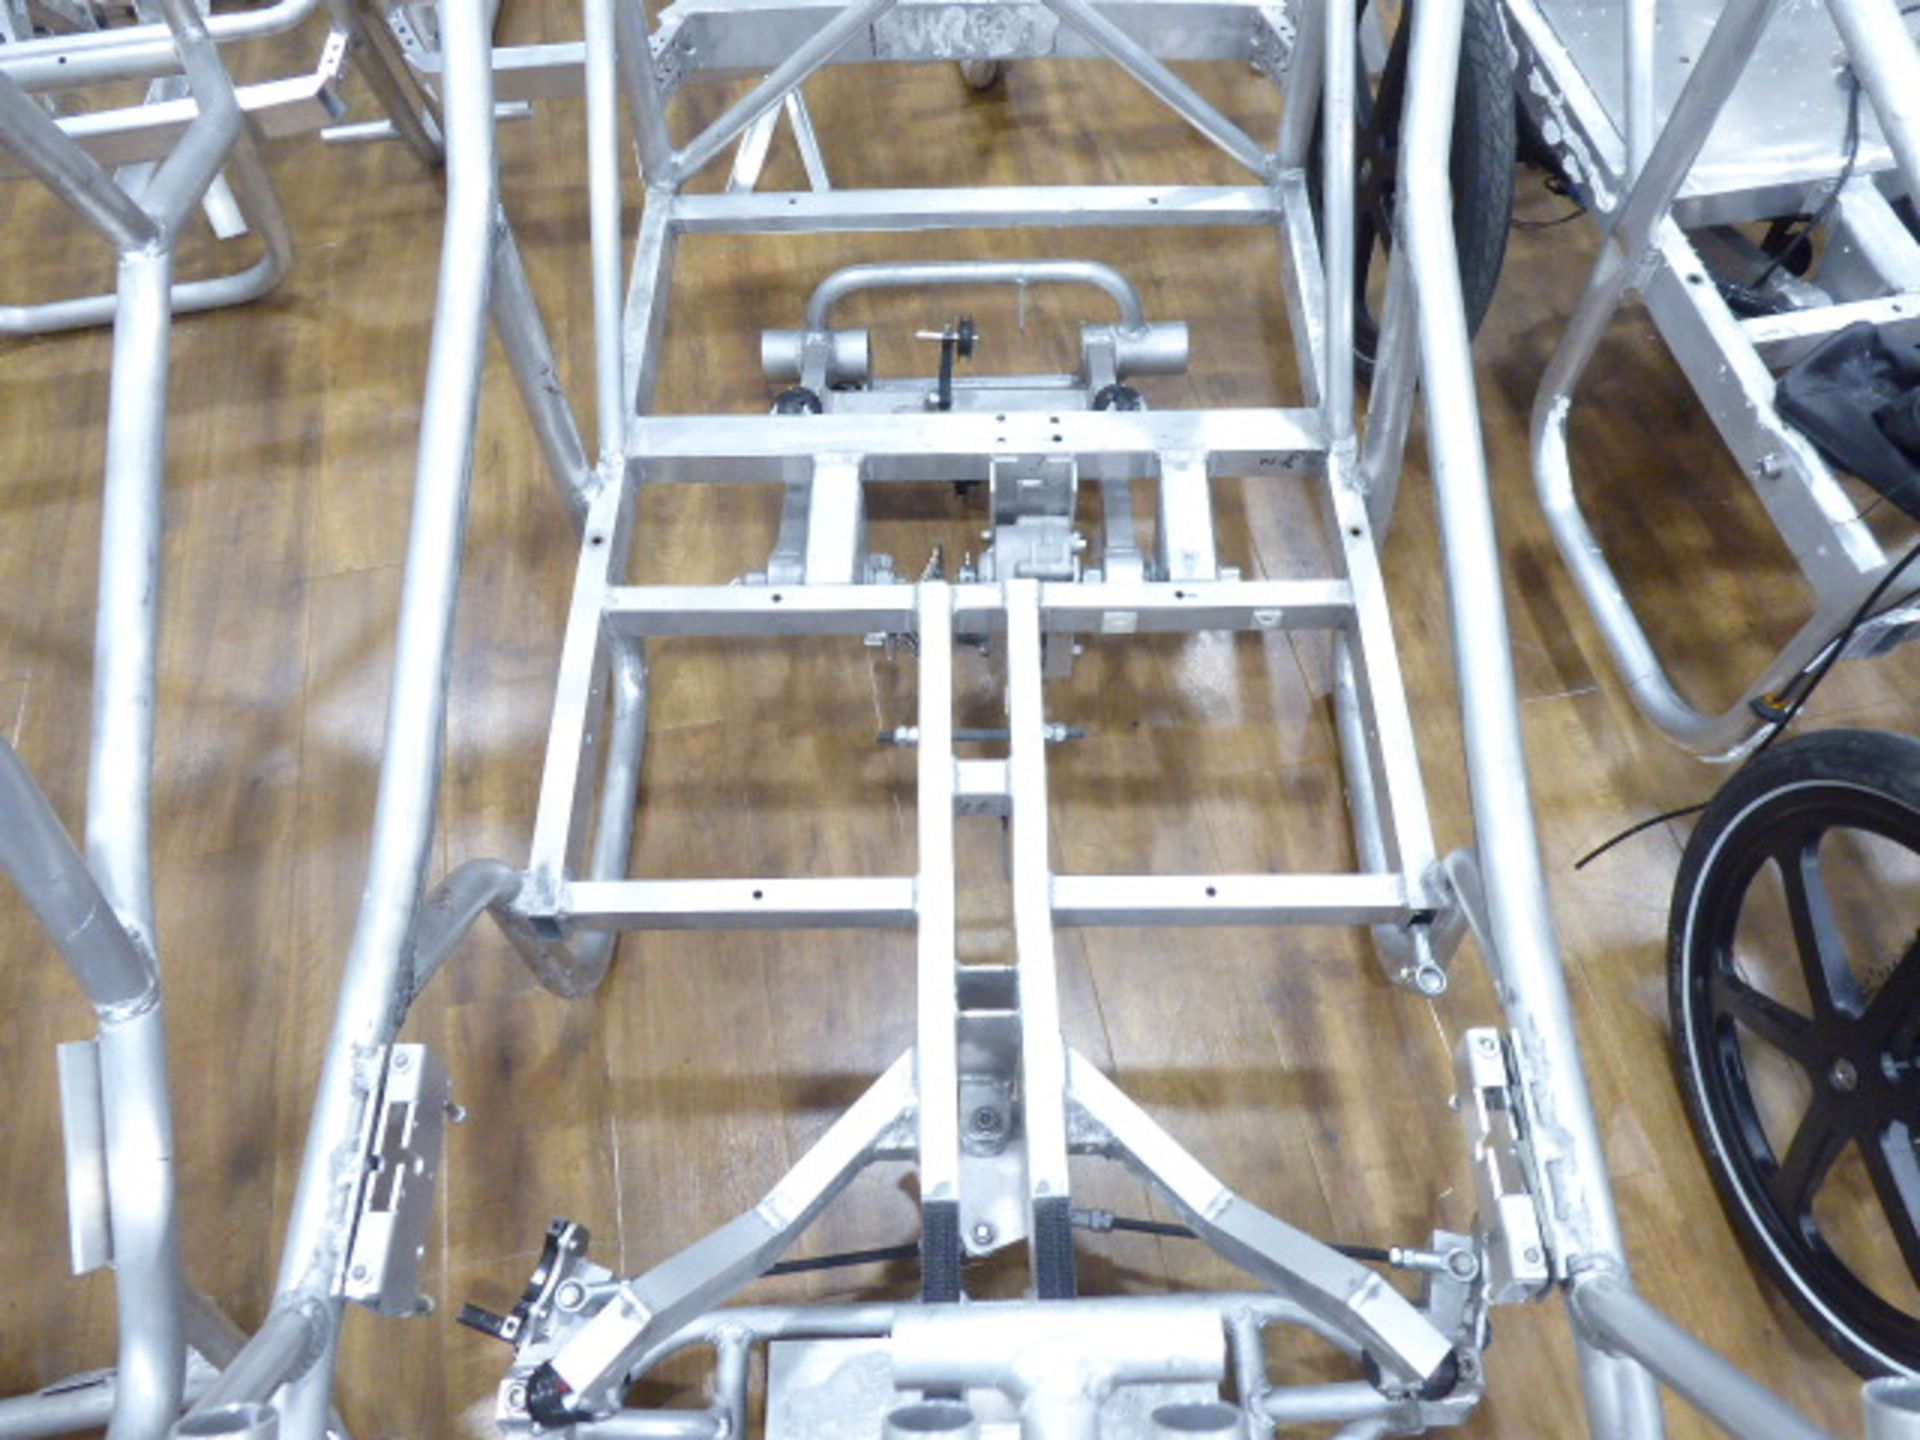 Incomplete DryCycle electric assist pedal cycle, used as a former crash test example - Image 3 of 3